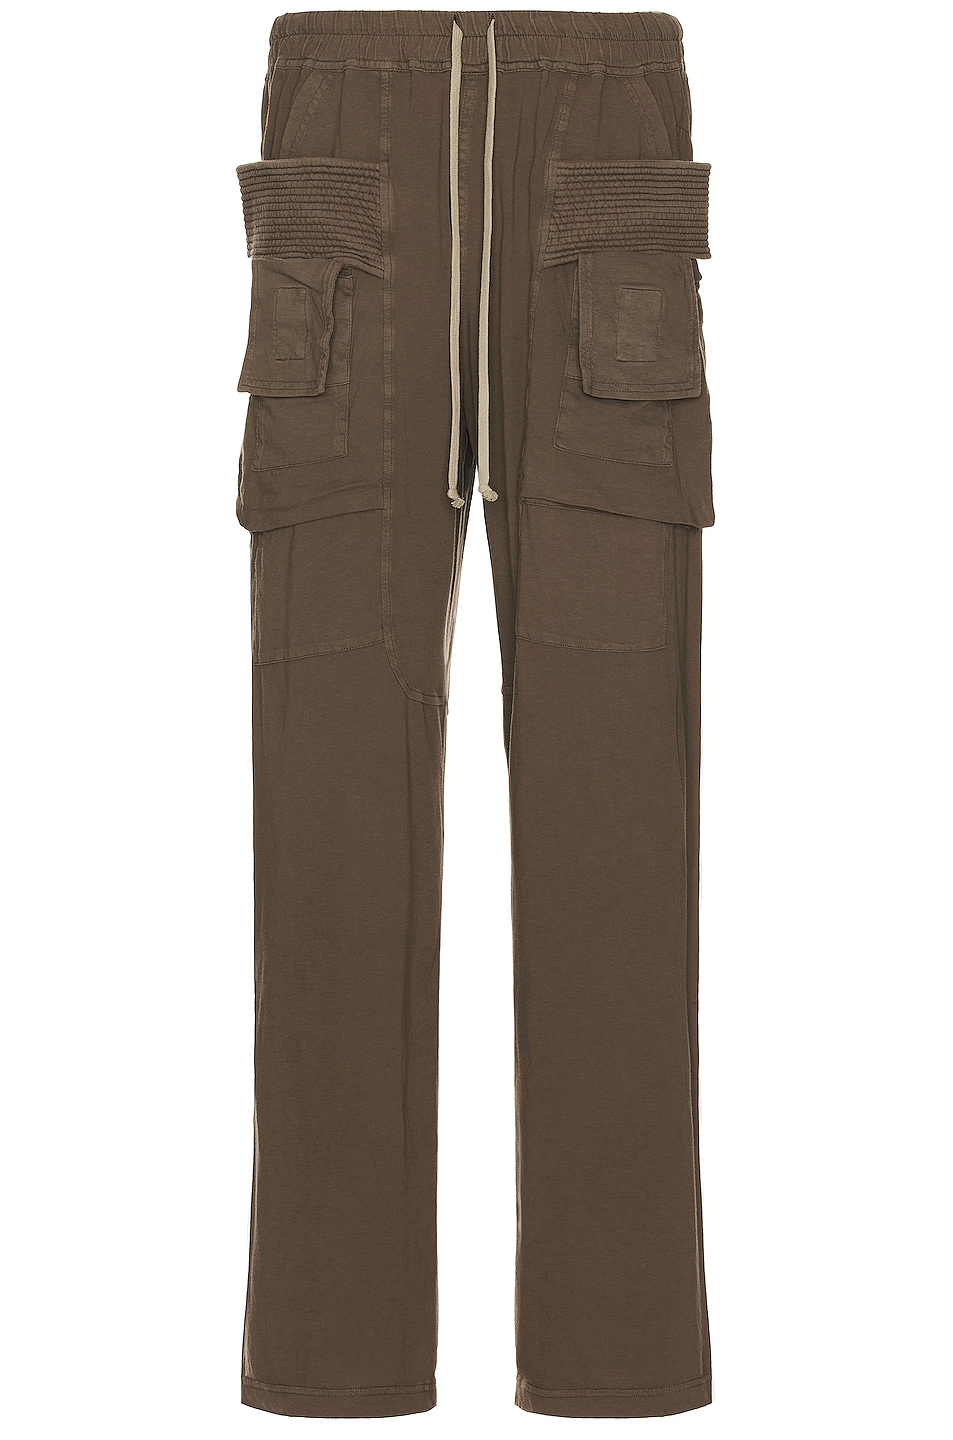 Creatch Cargo Drawstring Pants in Brown